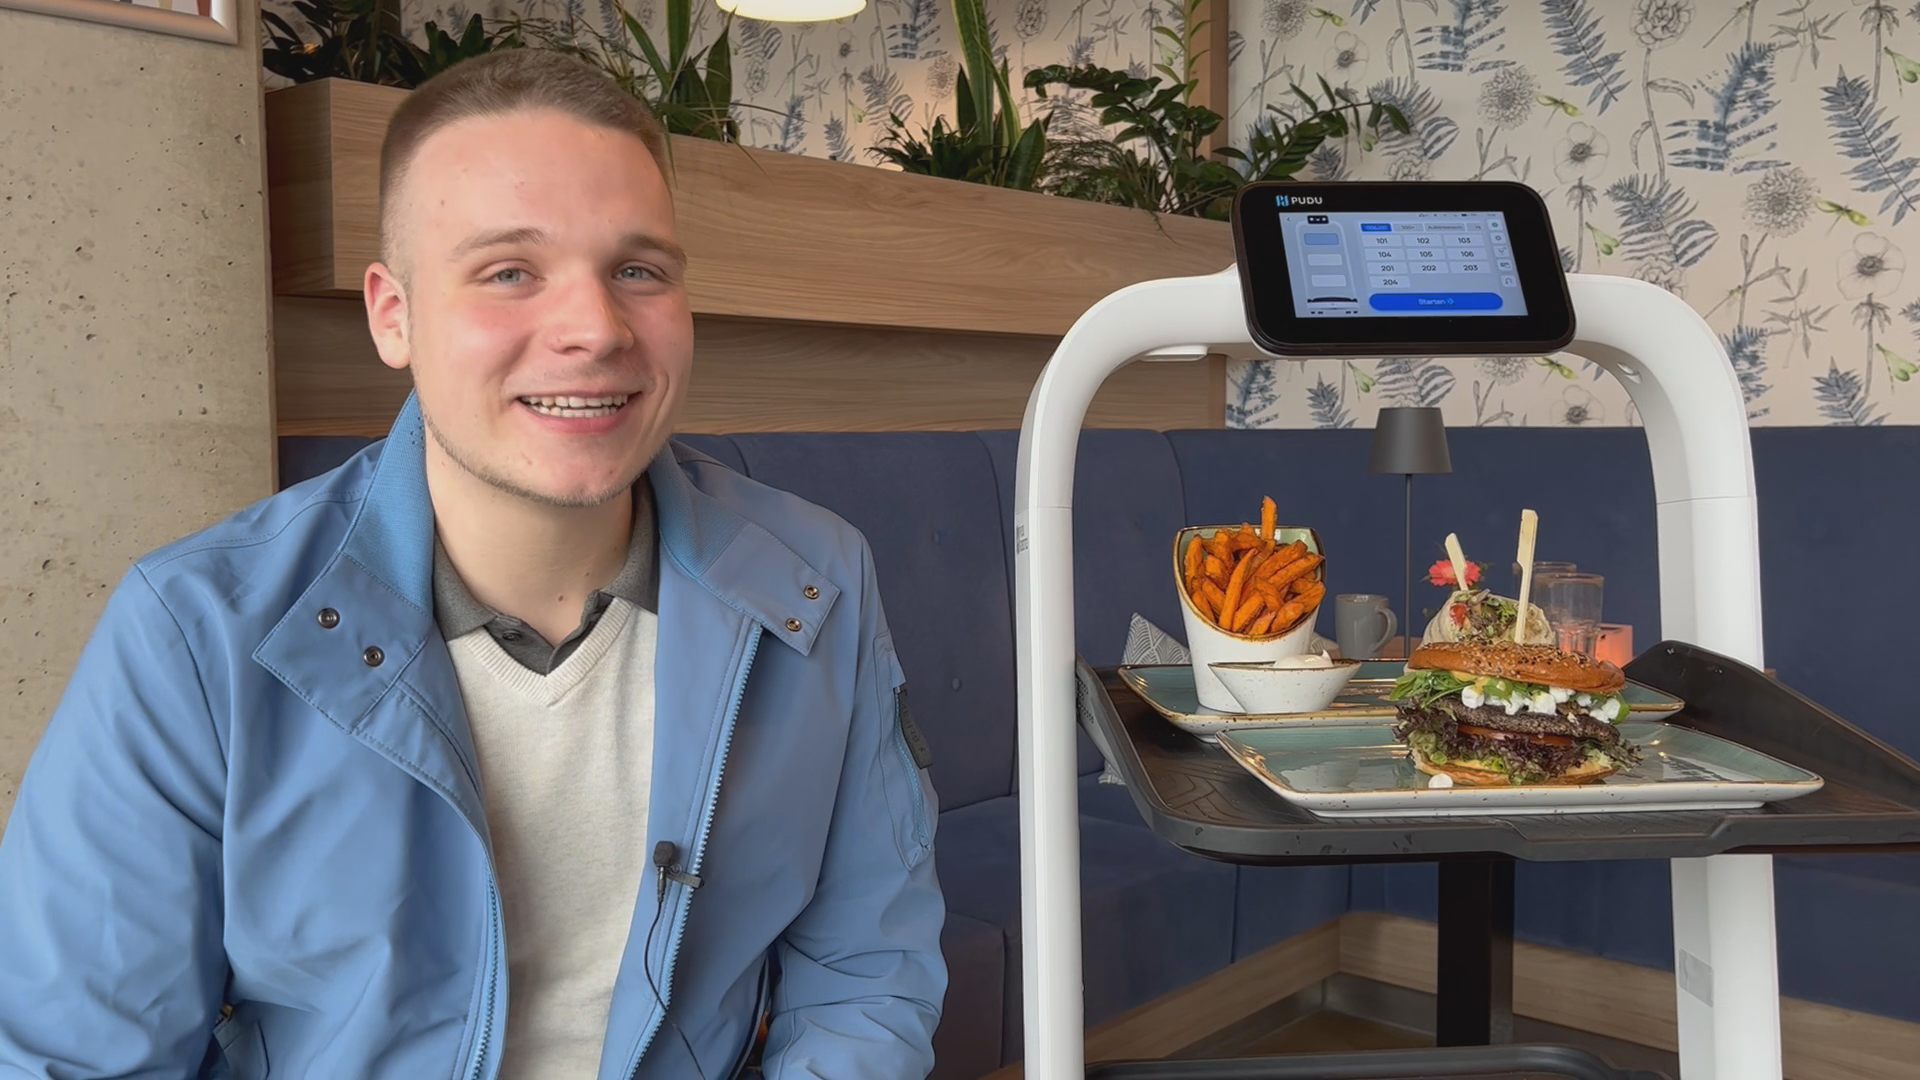 Neumarkt: Eatery now relies on serving robots